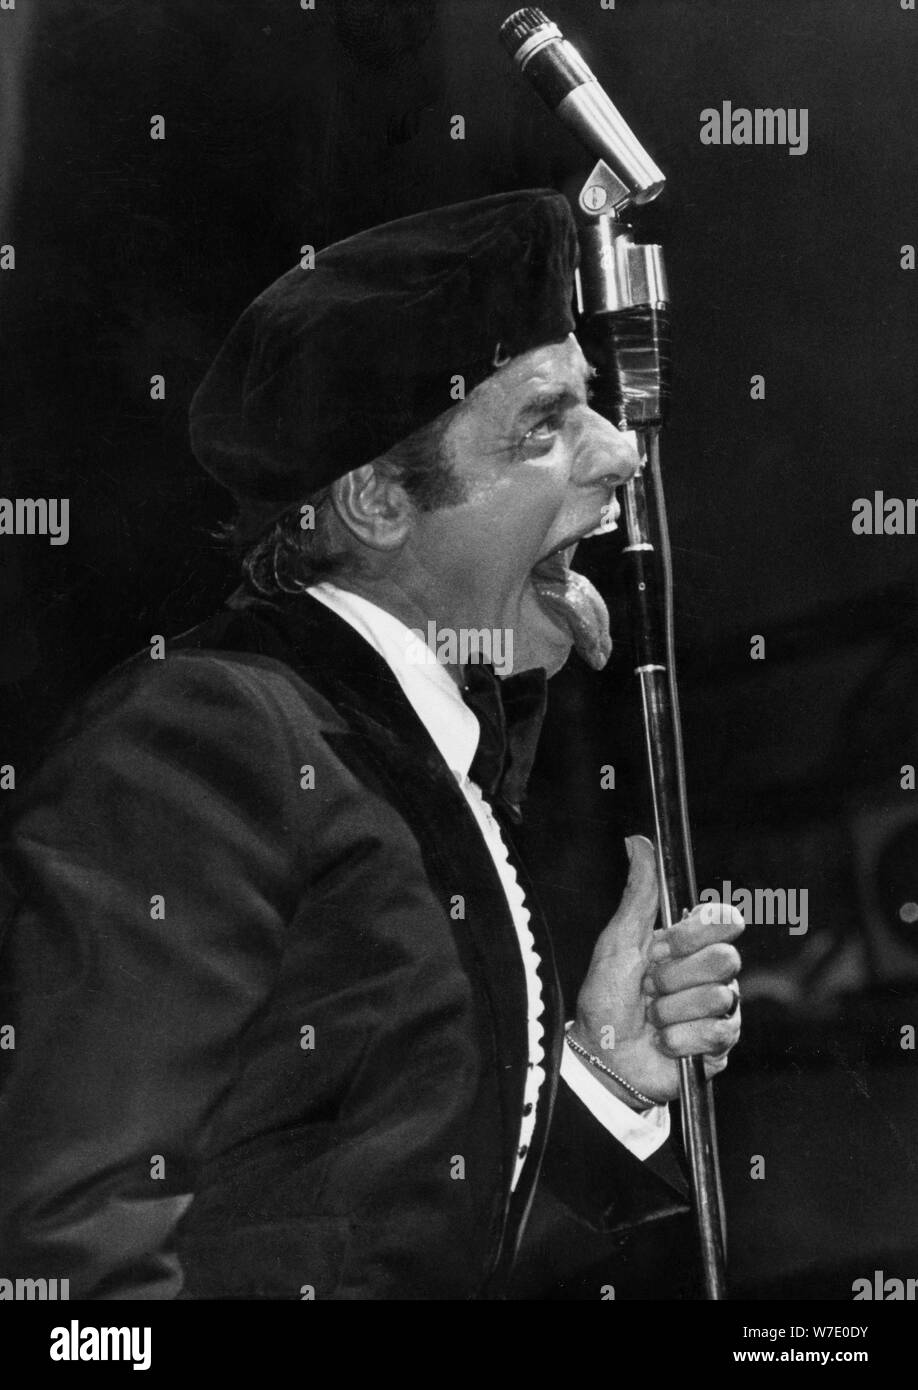 American comedian and actor Jerry Lewis during a show at l'Olympia, Paris, France, c1980s(?). Artist: Unknown Stock Photo